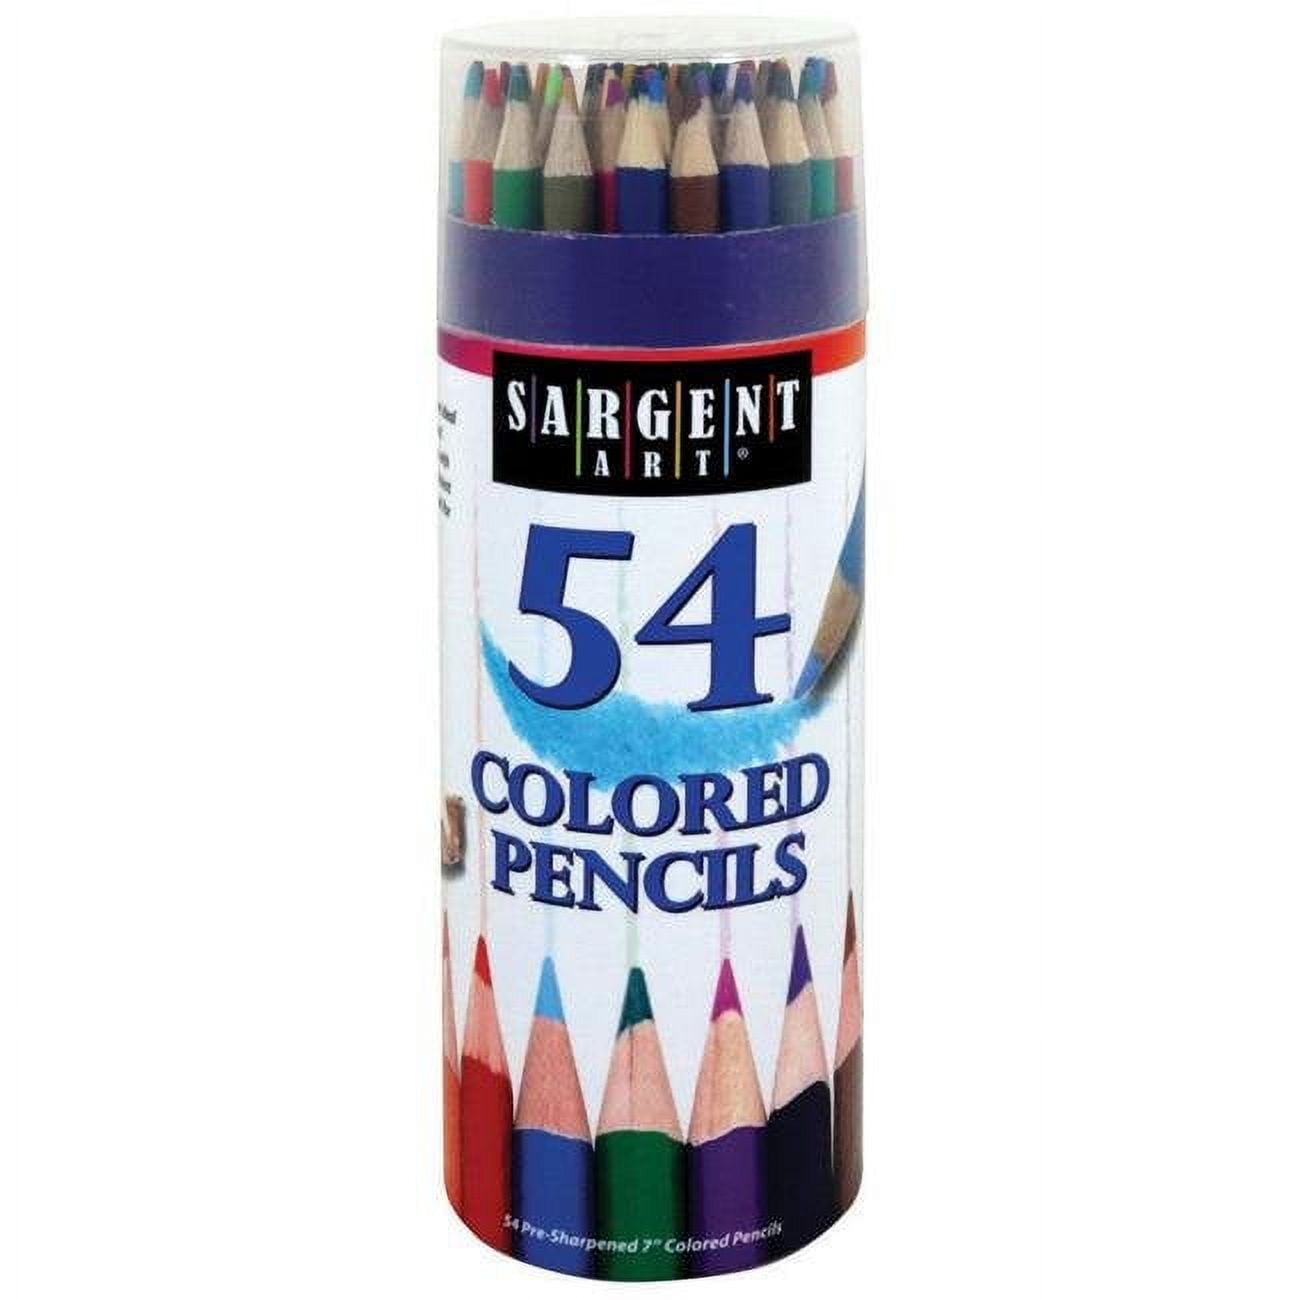 NEW Best Price Sargent Art 22-7251 Colored Pencils Pack of 